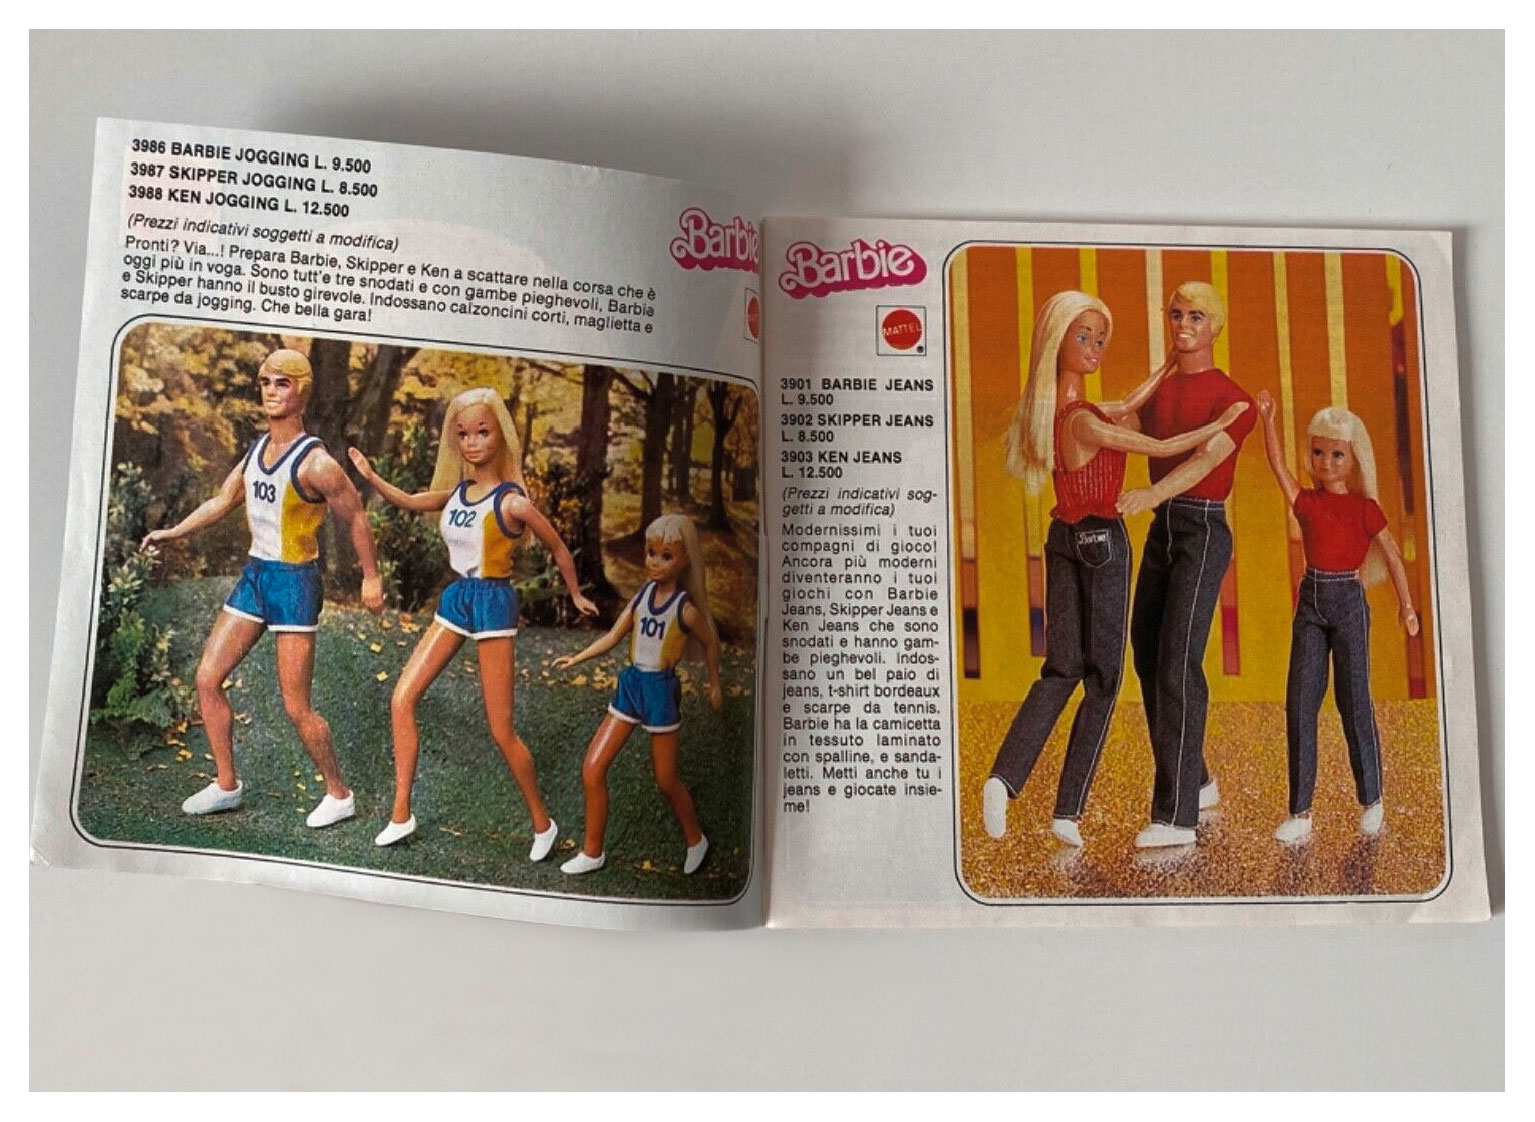 From 1982 Italian Barbie booklet